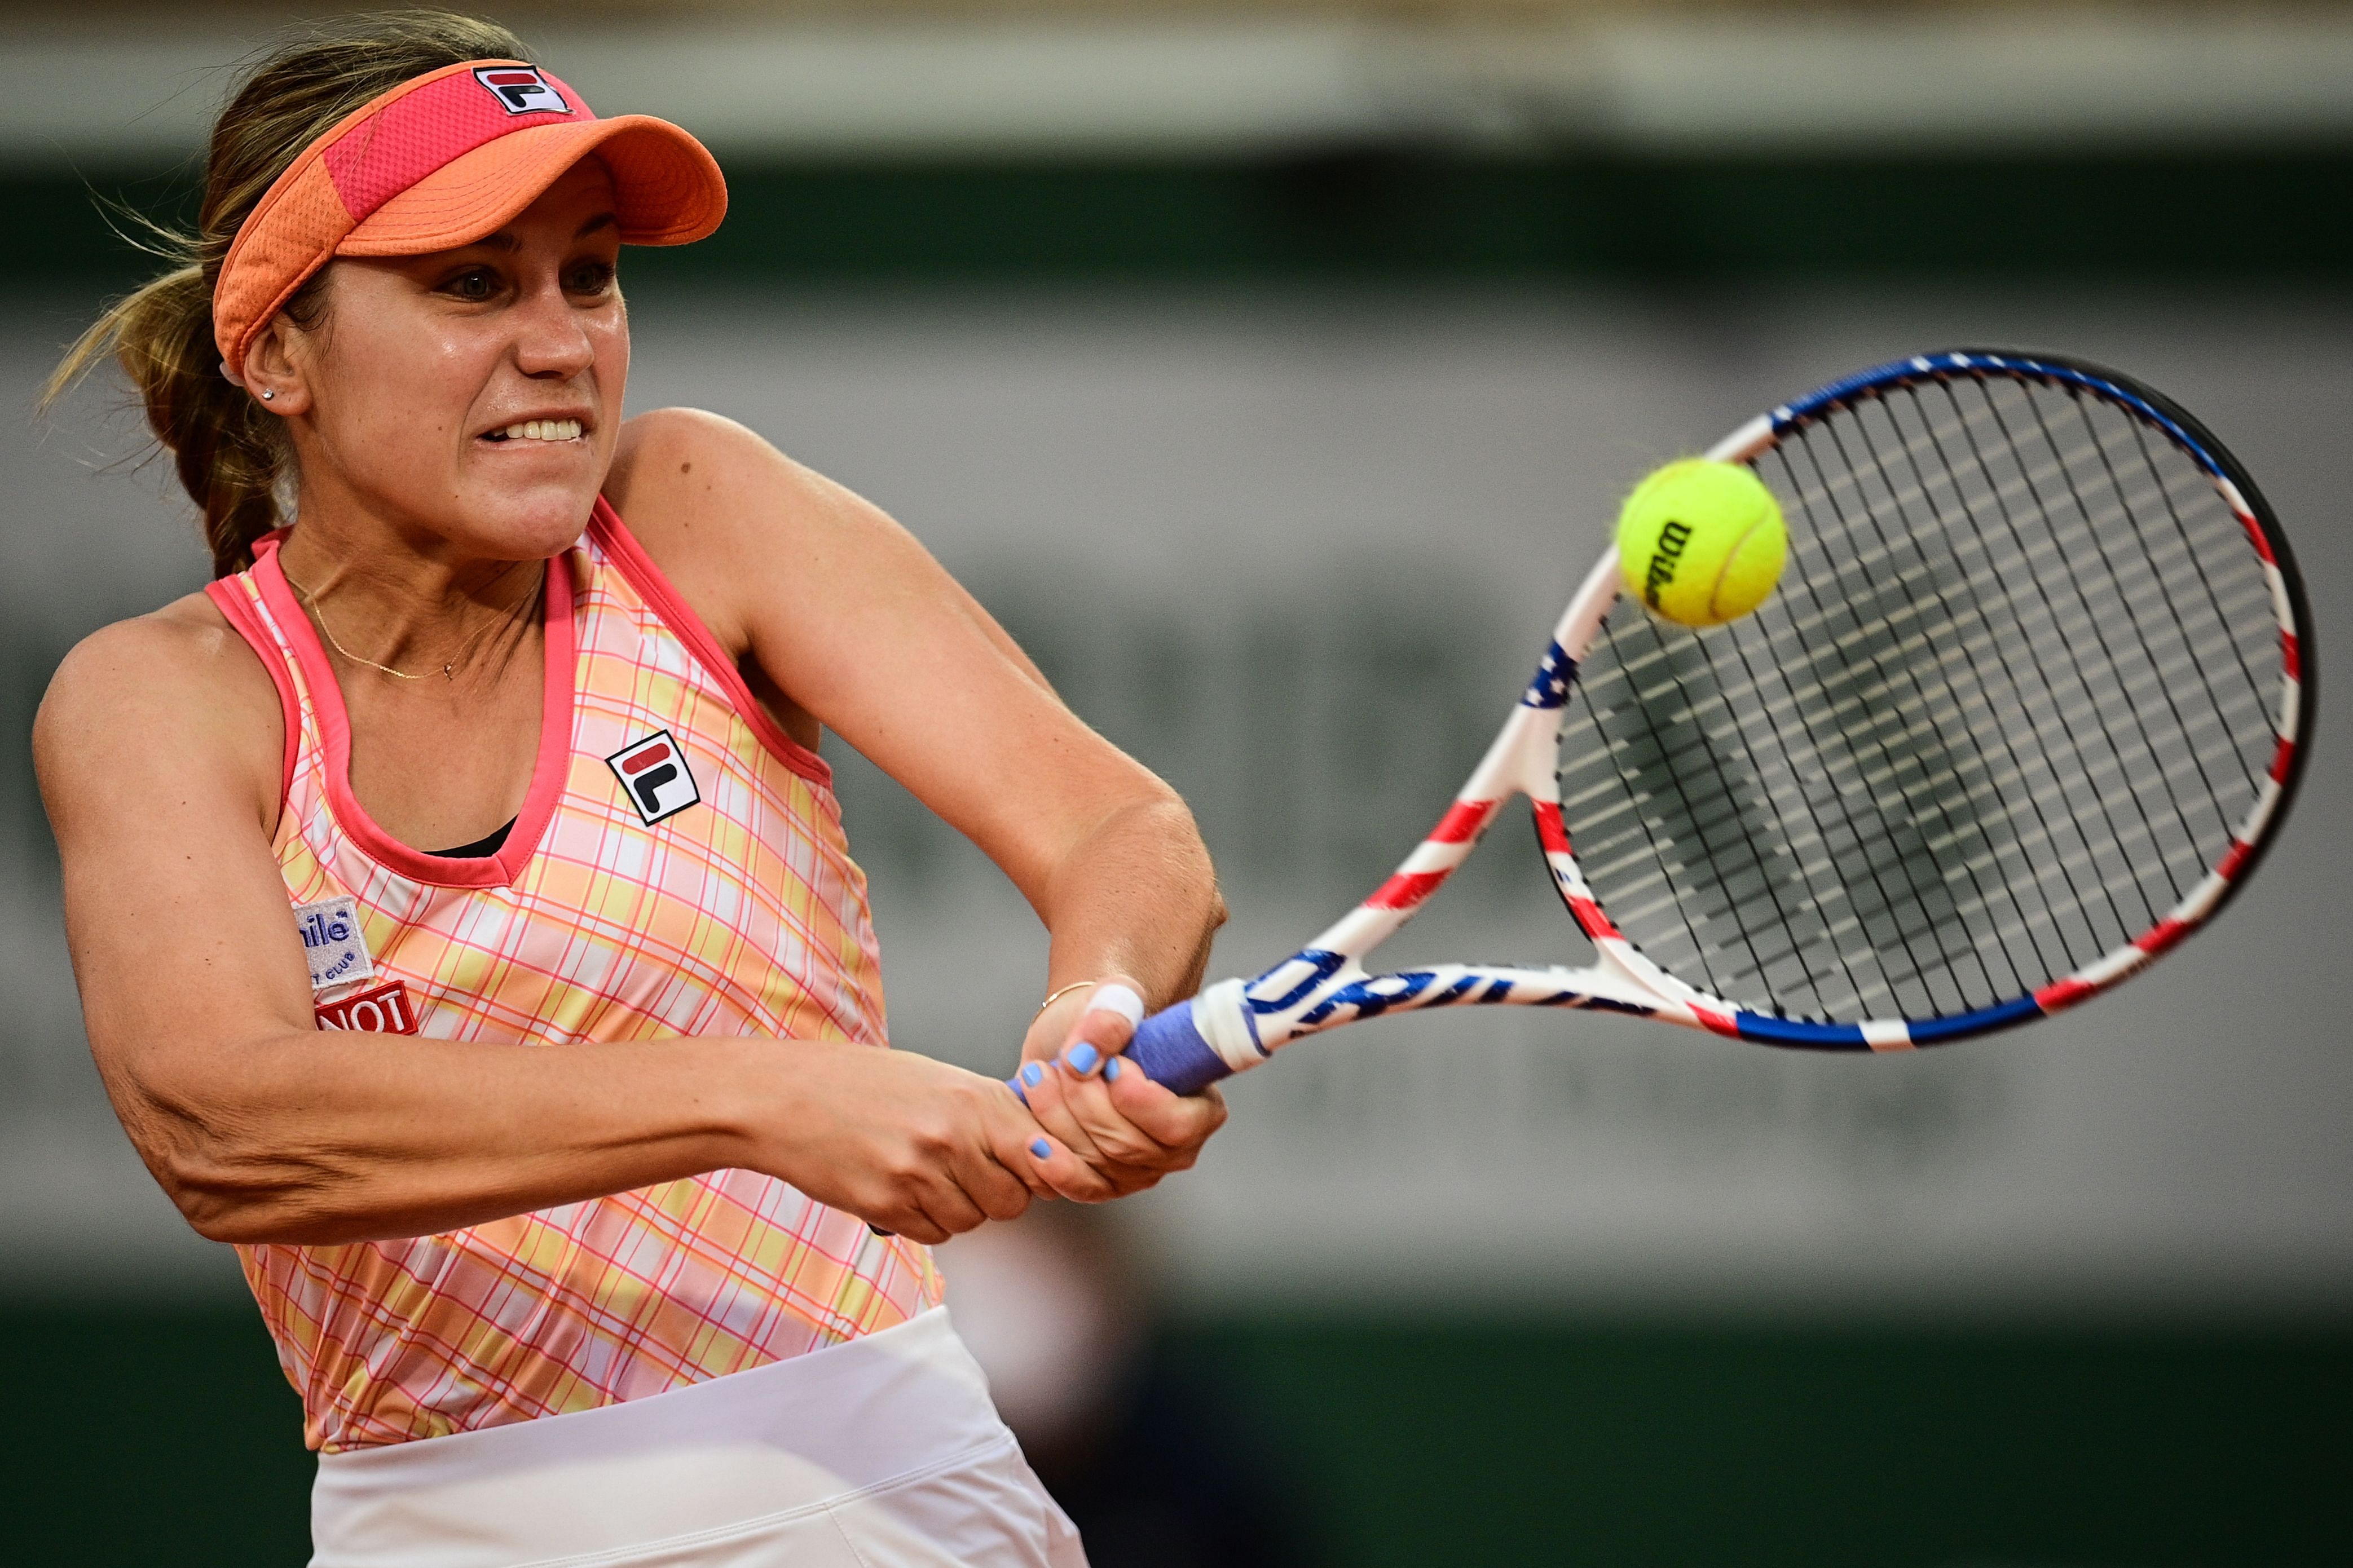 Sofia Kenin of the US returns the ball to Czech Republic's Petra Kvitova during their women's singles semi-final tennis match on Day 12 of The Roland Garros 2020 French Open tennis tournament in Paris on October 8, 2020. Credit: AFP